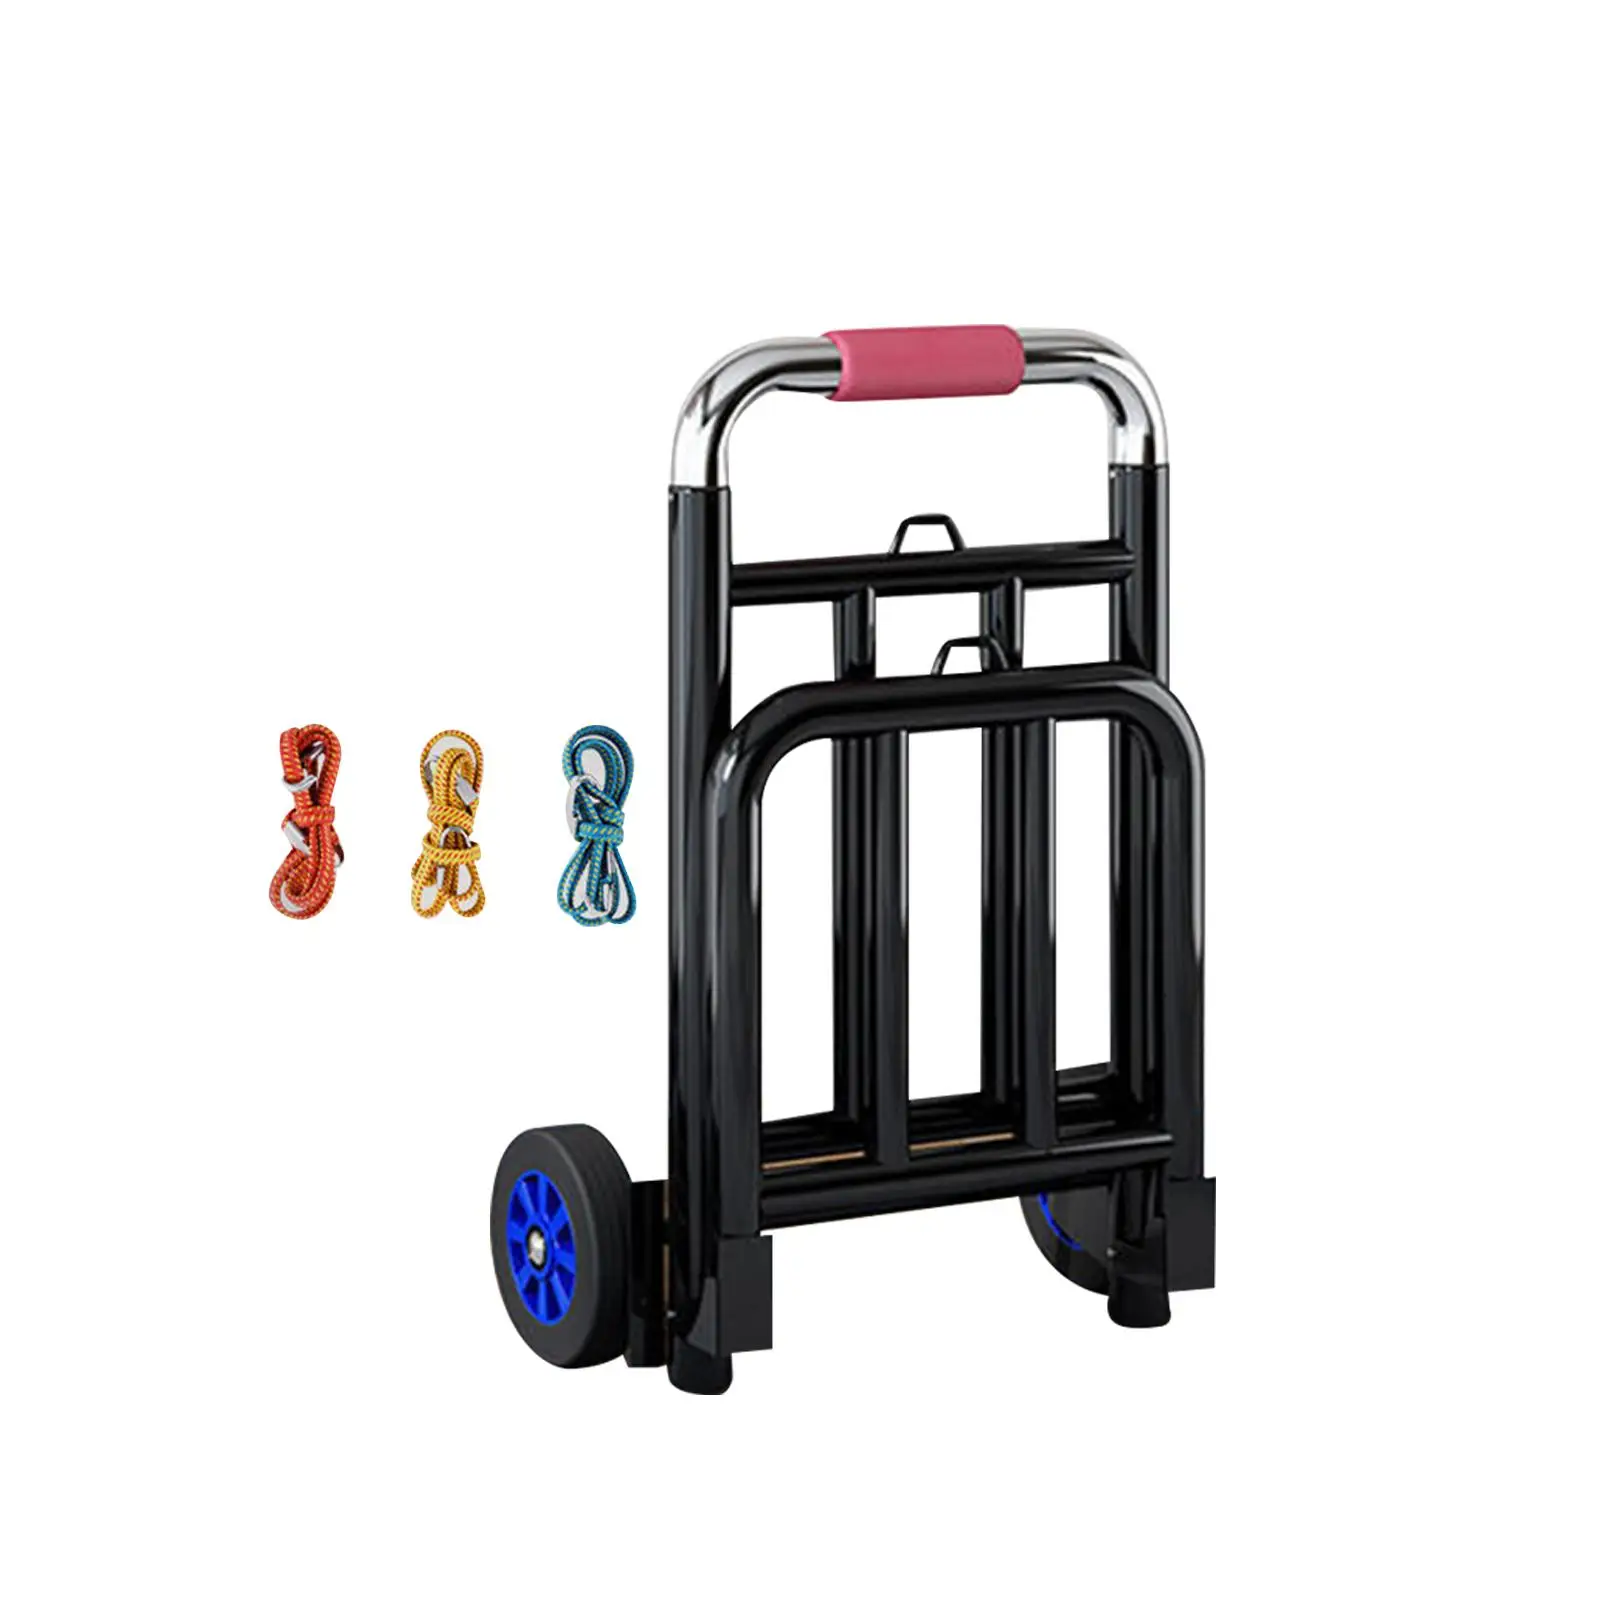 Folding Hand Truck Utility Cart Folding Hand Cart Heavy Duty Luggage Cart for Office